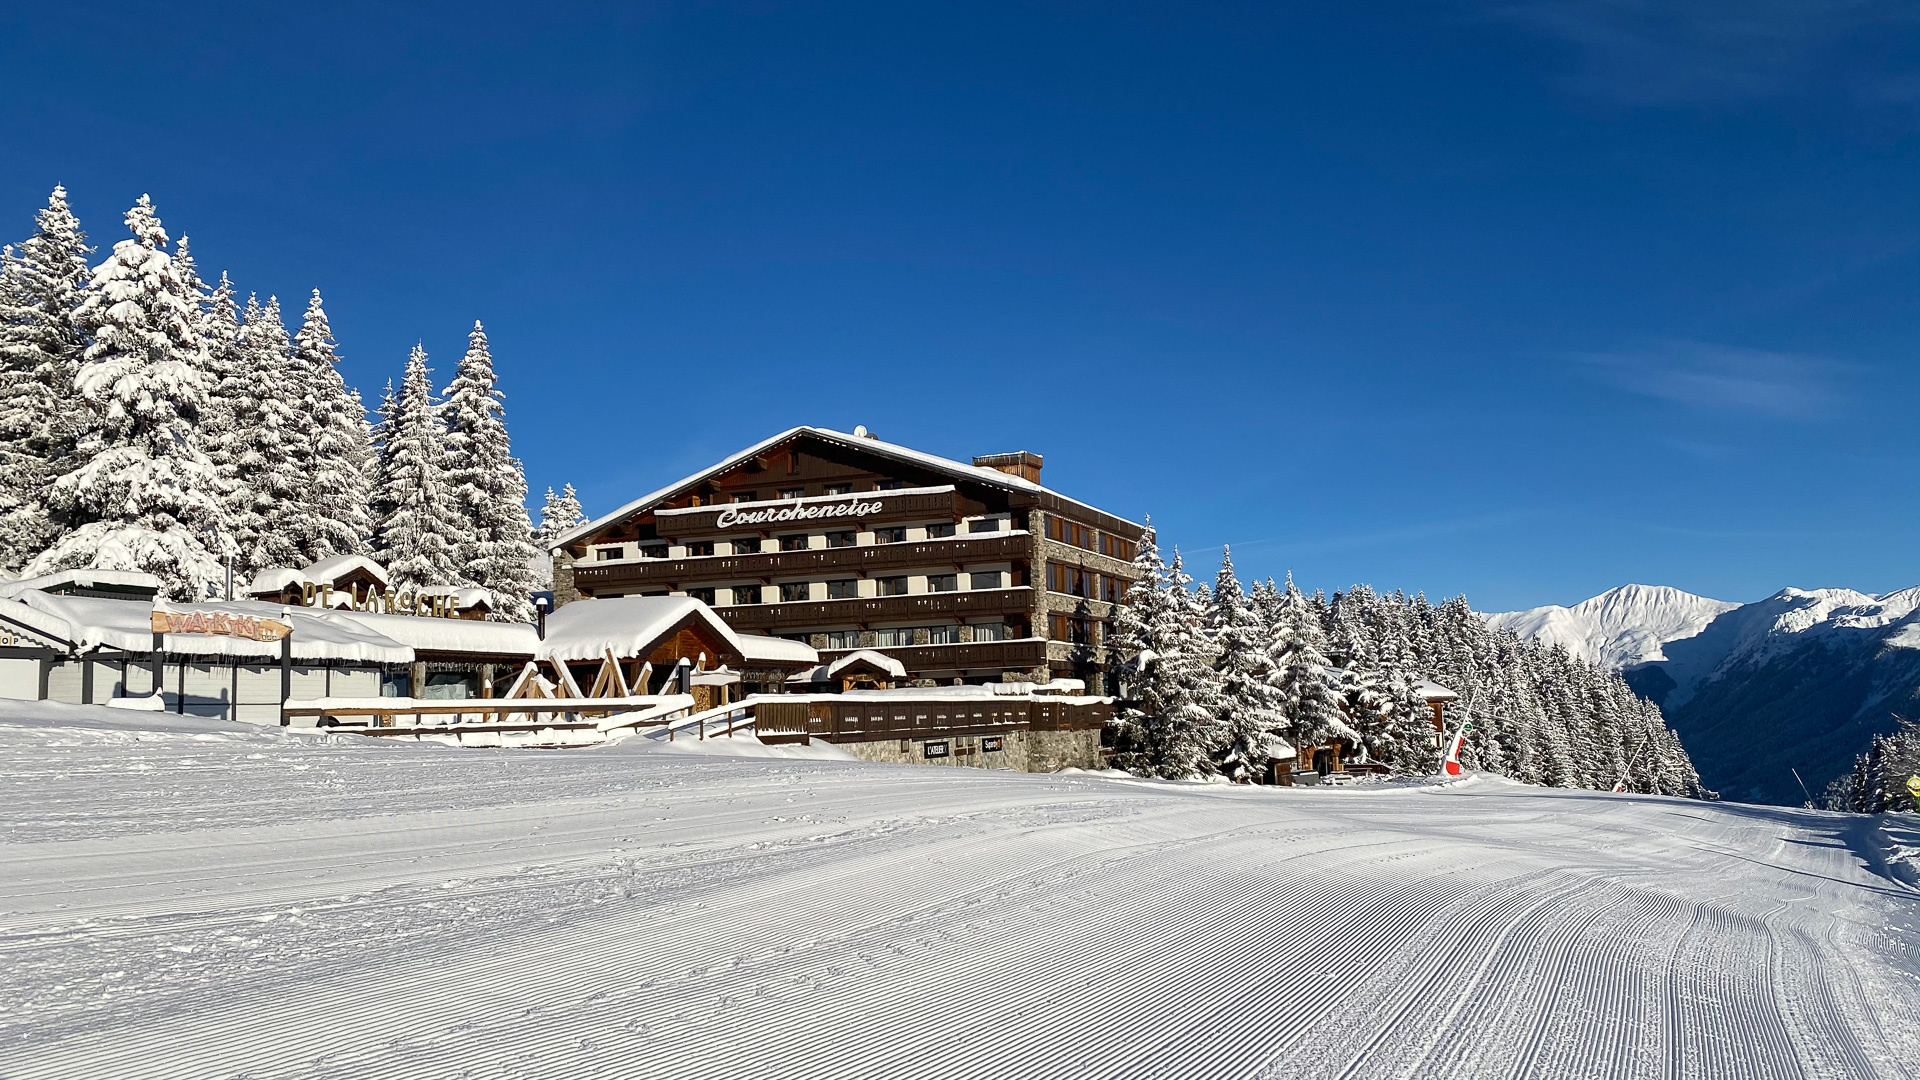 Hotel Courchevel, Home away from home, Luxury accommodation, Courcheneige chalet, 1920x1080 Full HD Desktop